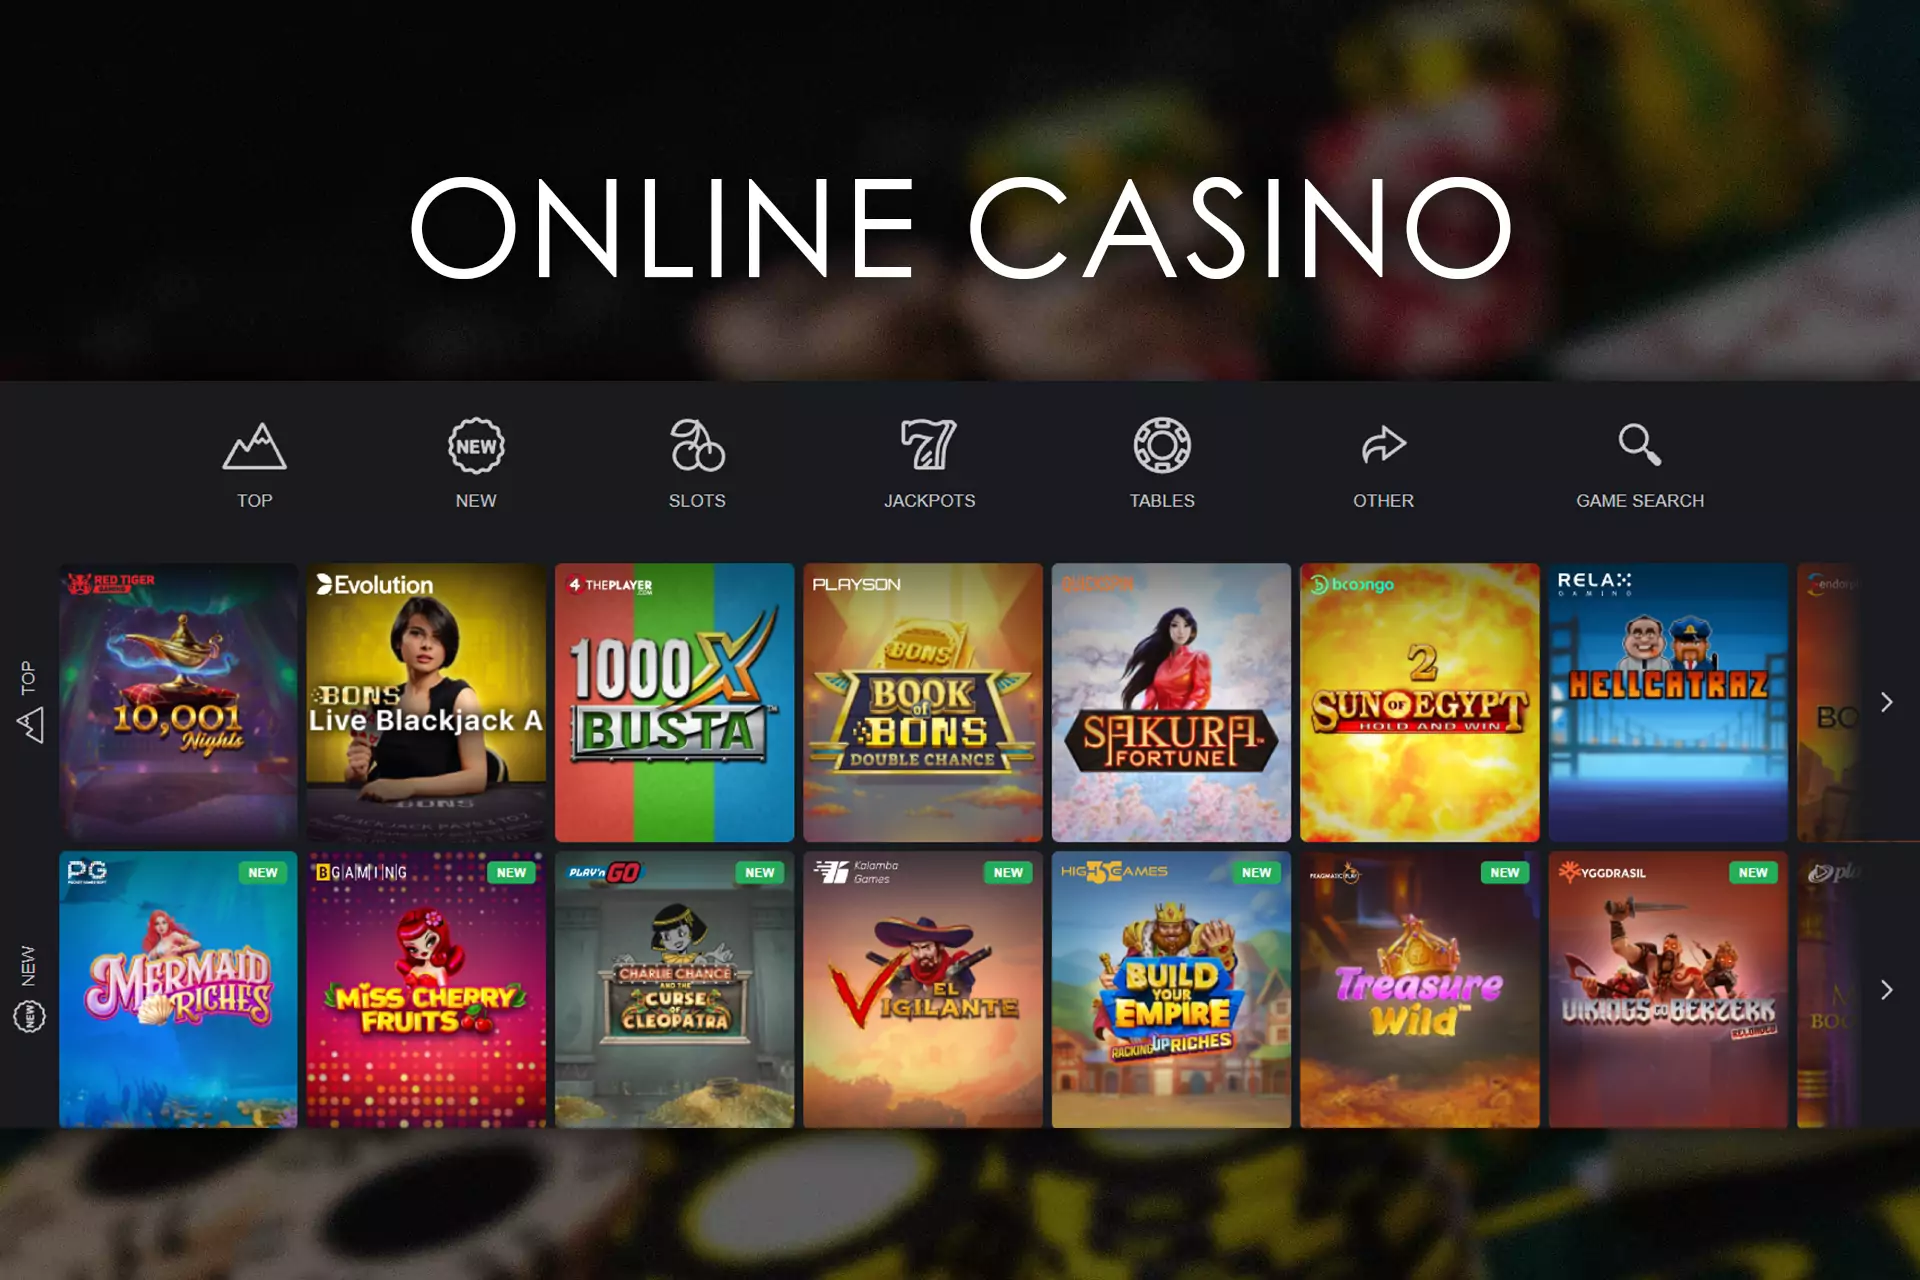 If you are a fan of slots or table games, go to the casino section.